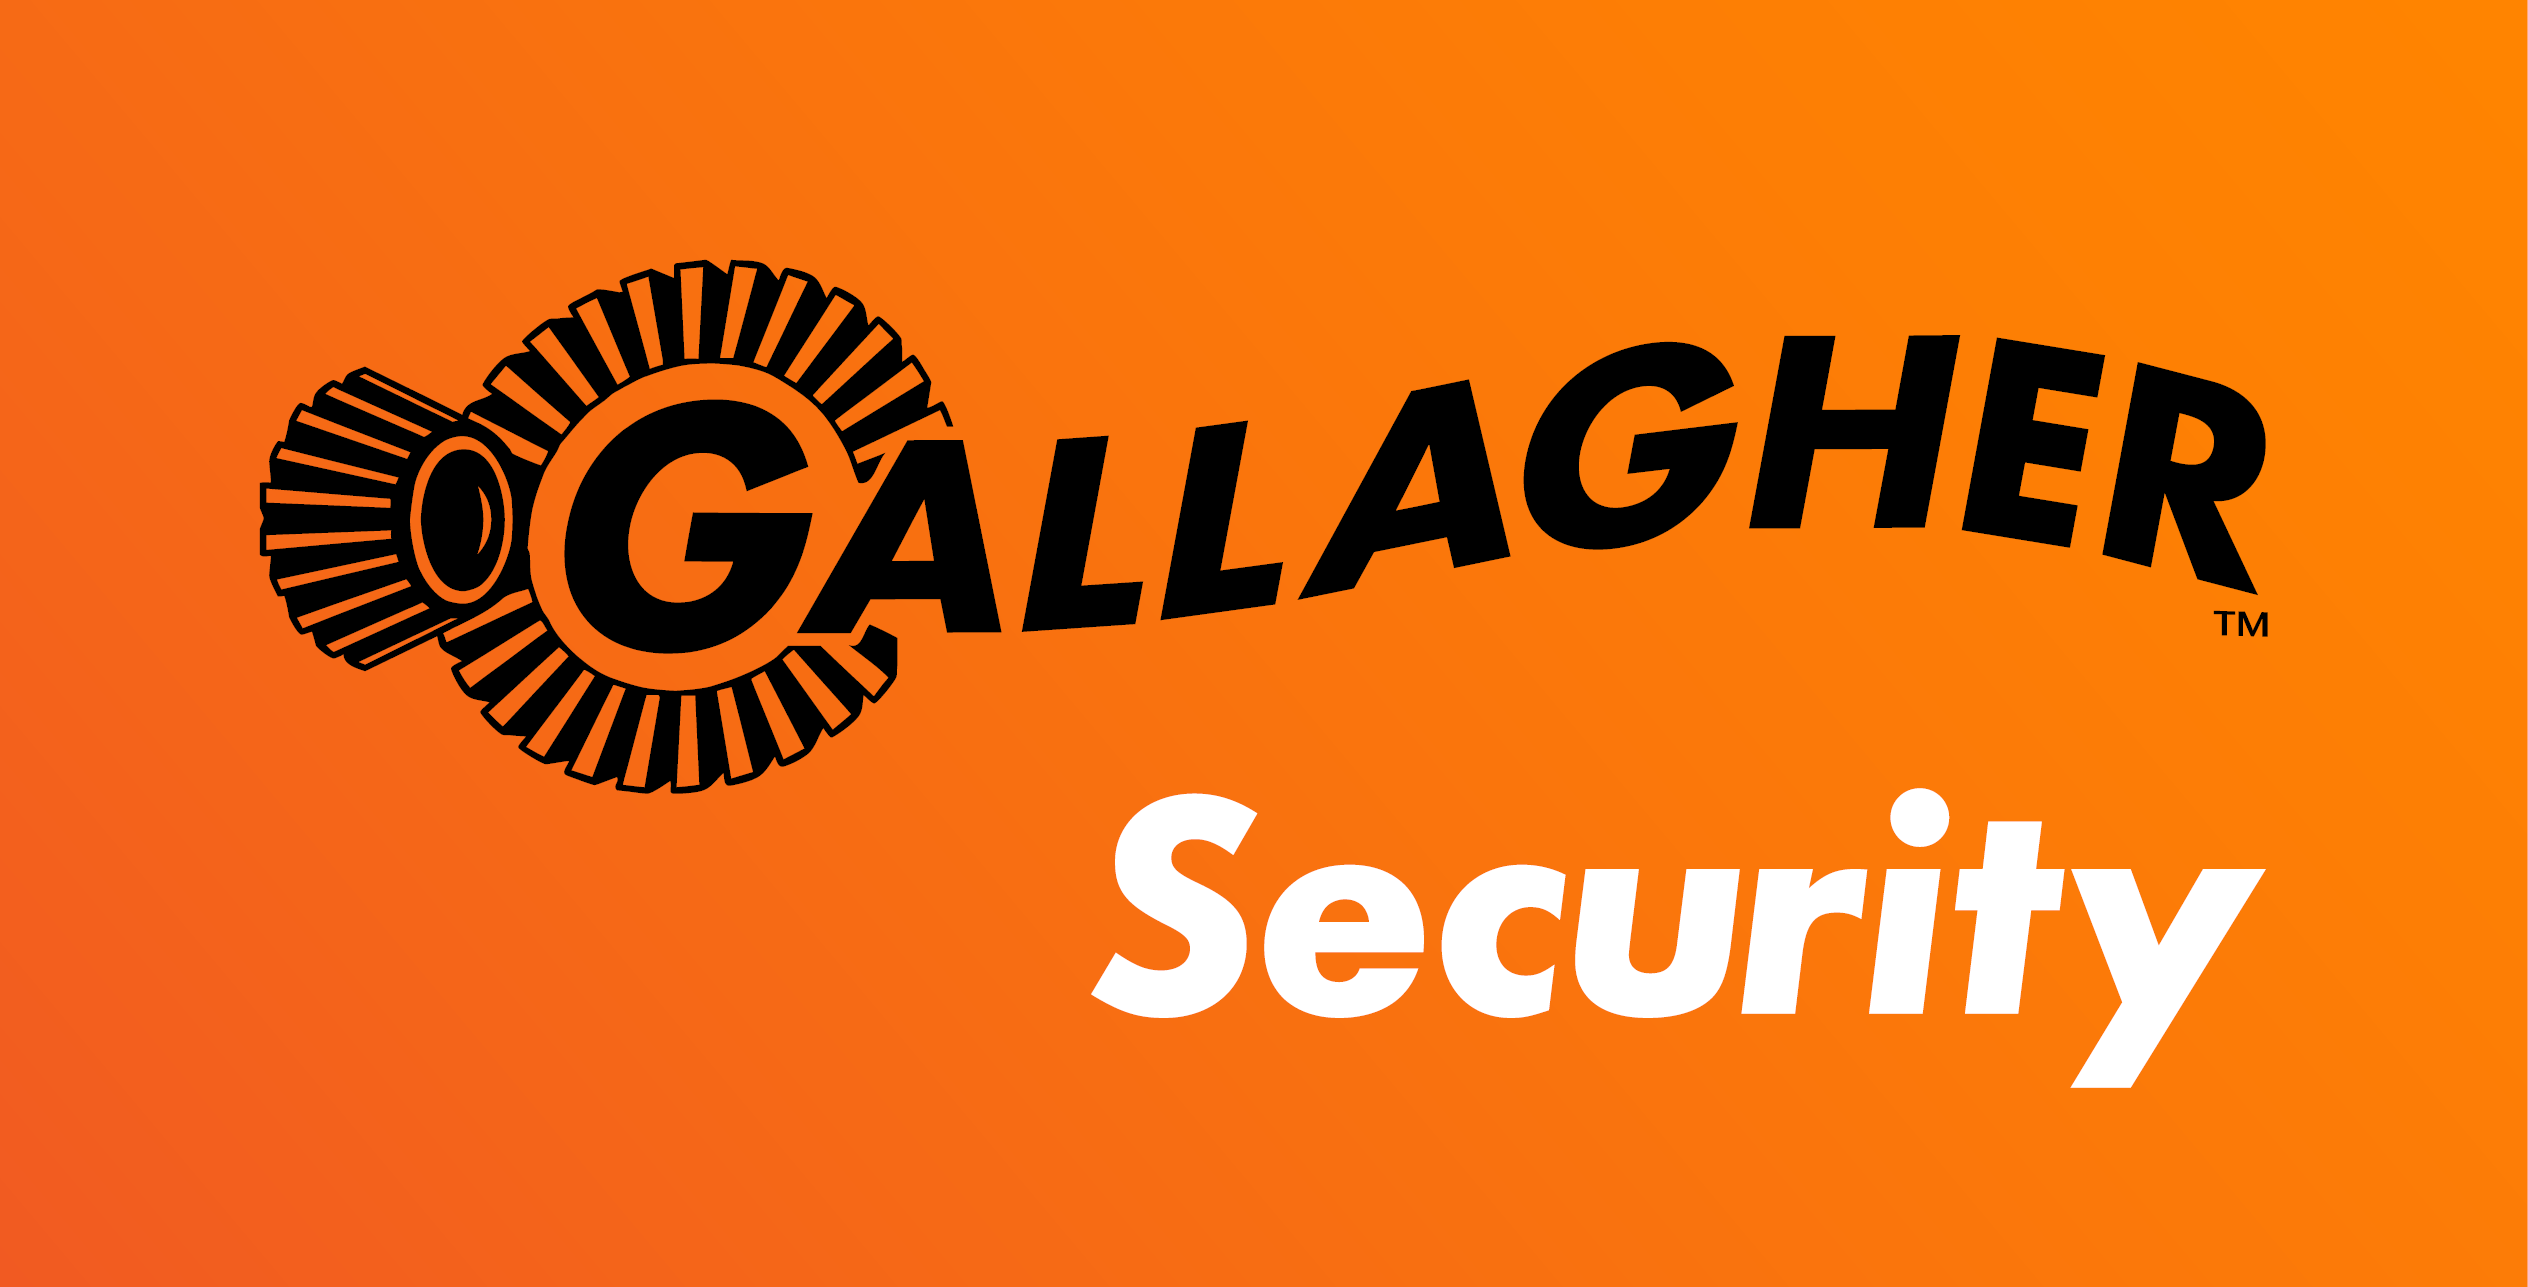 Gallagher Security Company Logo